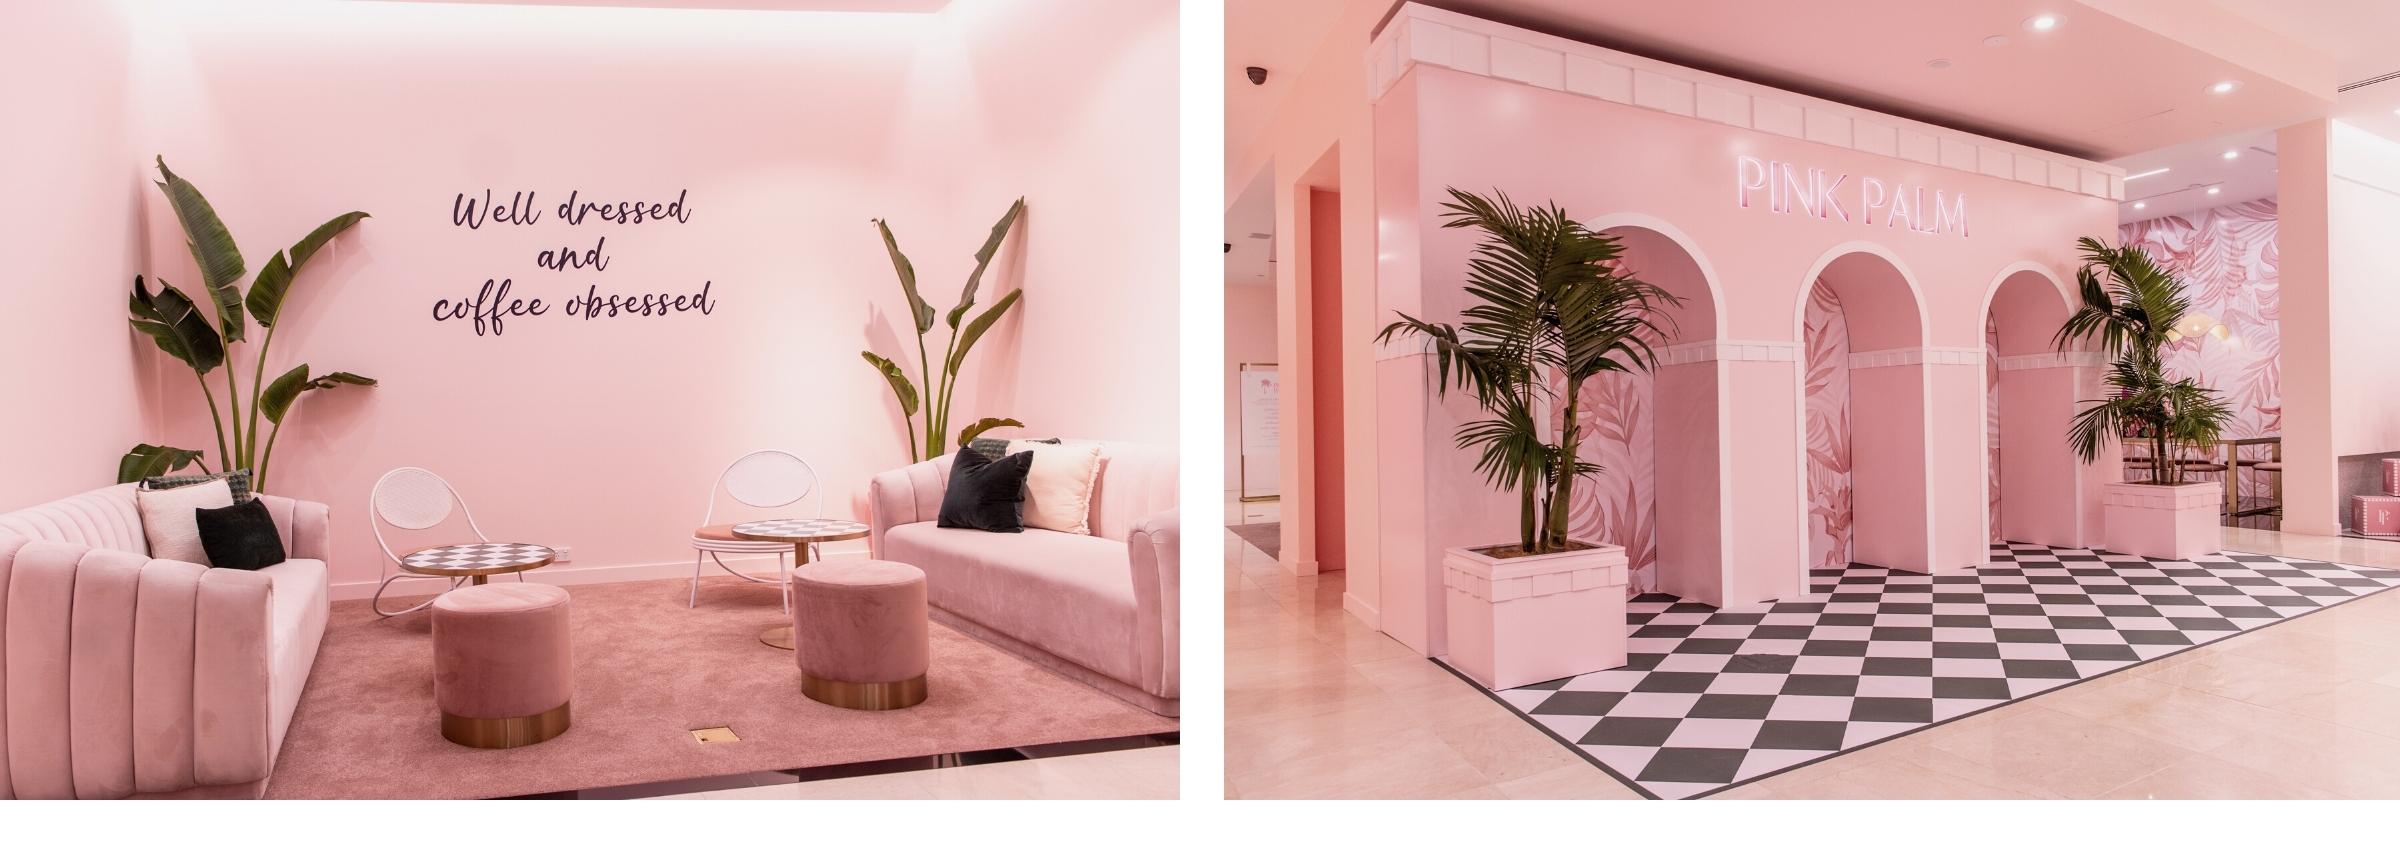 Website Gallery Moodboard - 2 Images - Pink Palm